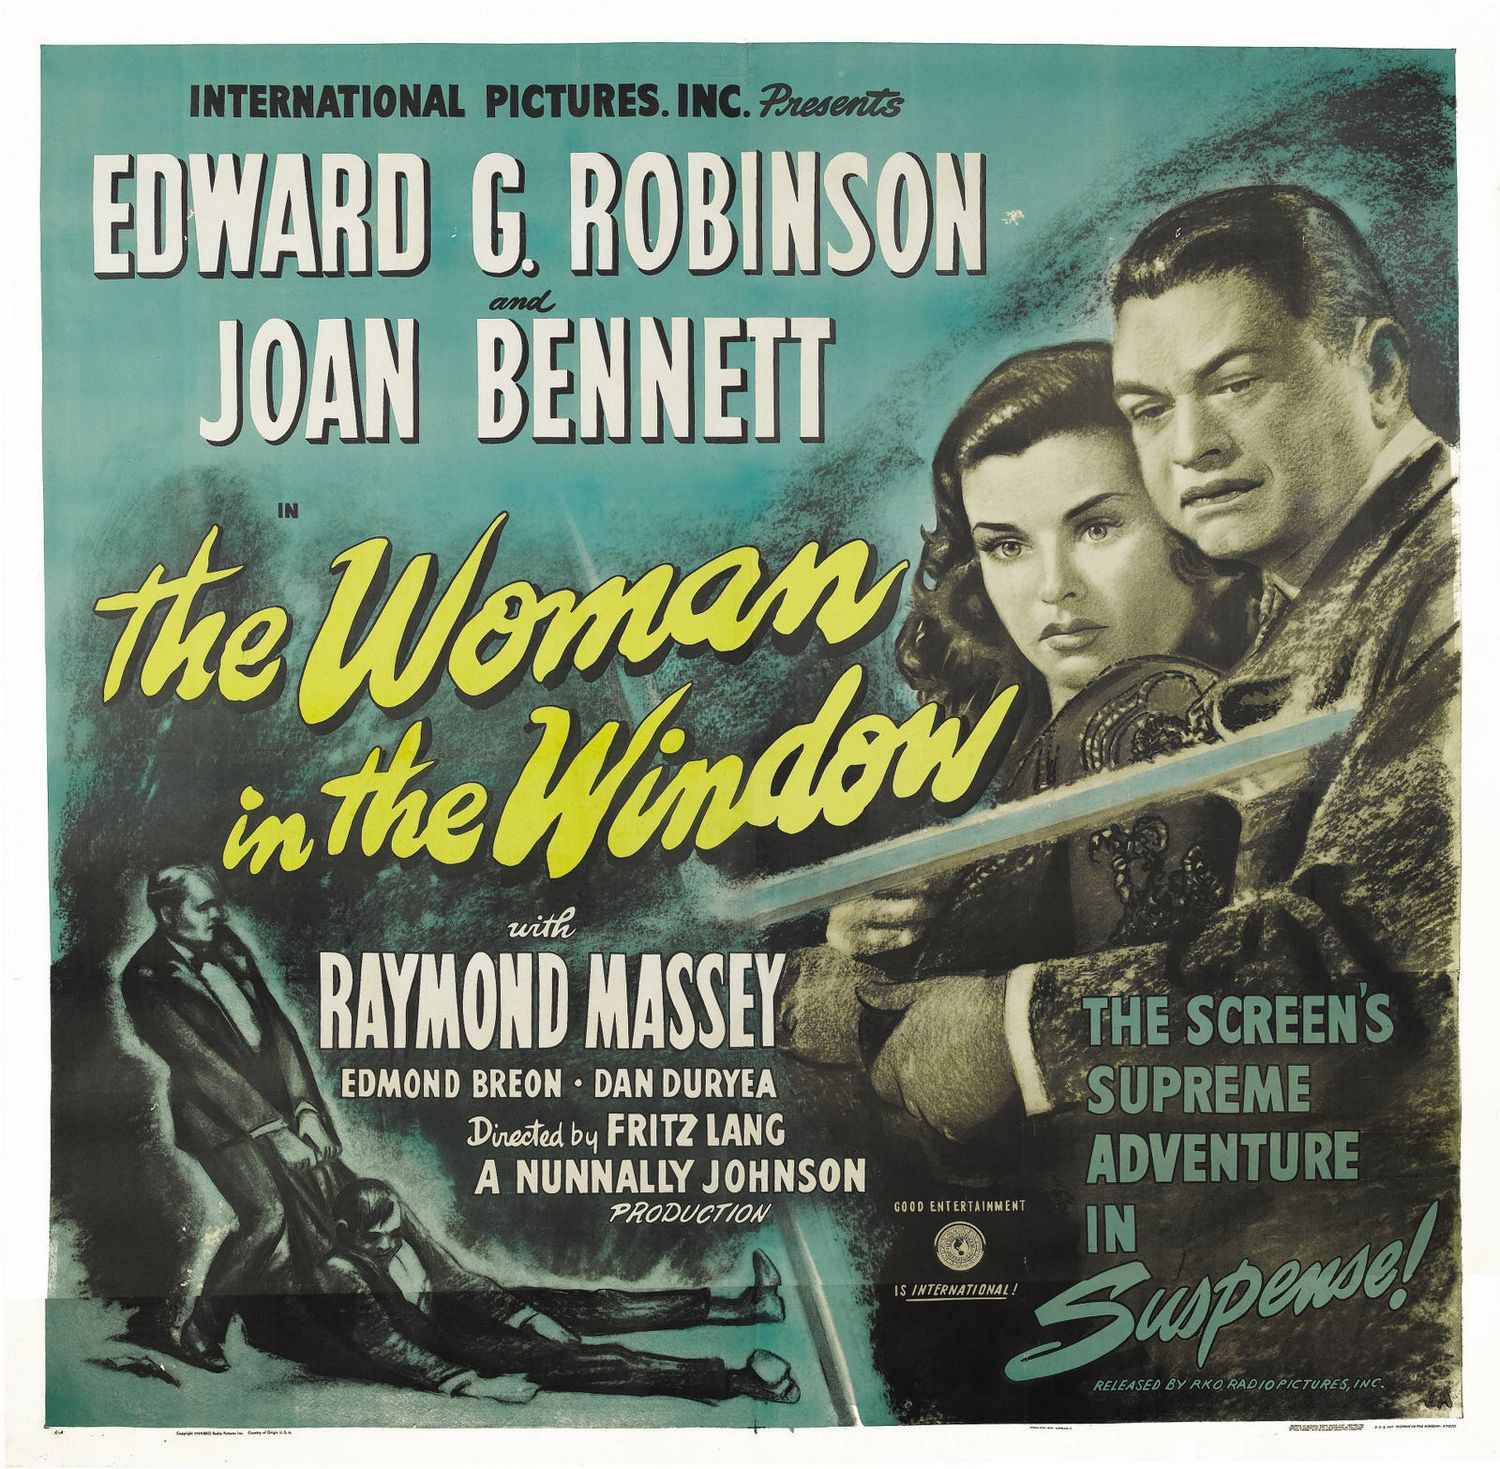 The Most Beautiful Fraud:  The Woman in the Window